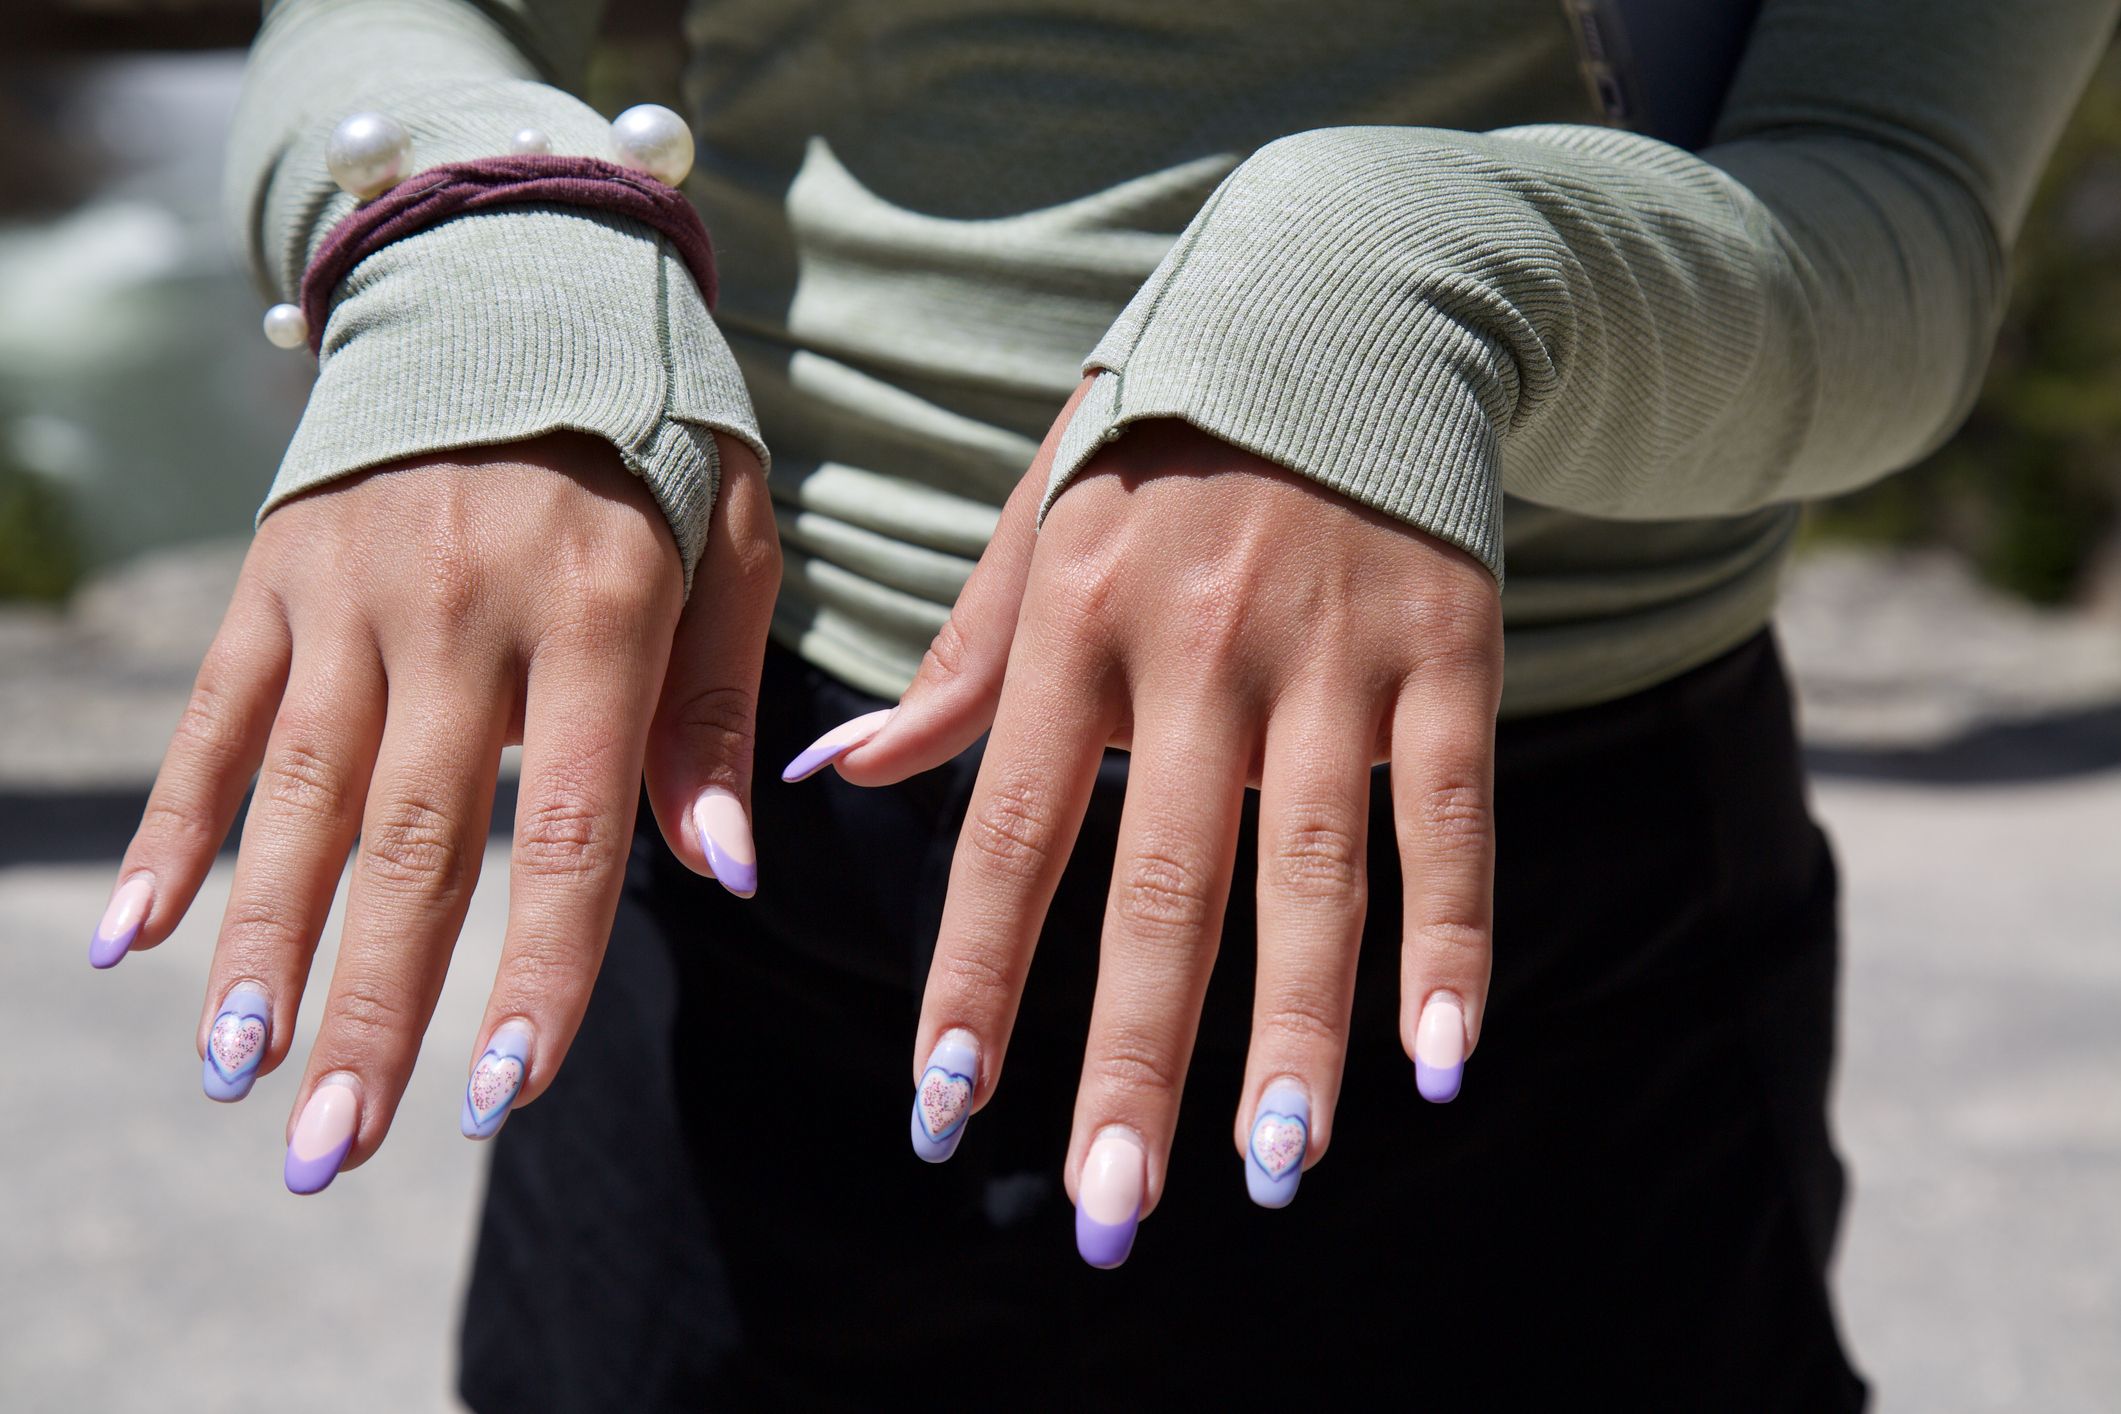 Best salons for gel nail extensions in Chelmsford | Fresha-thanhphatduhoc.com.vn